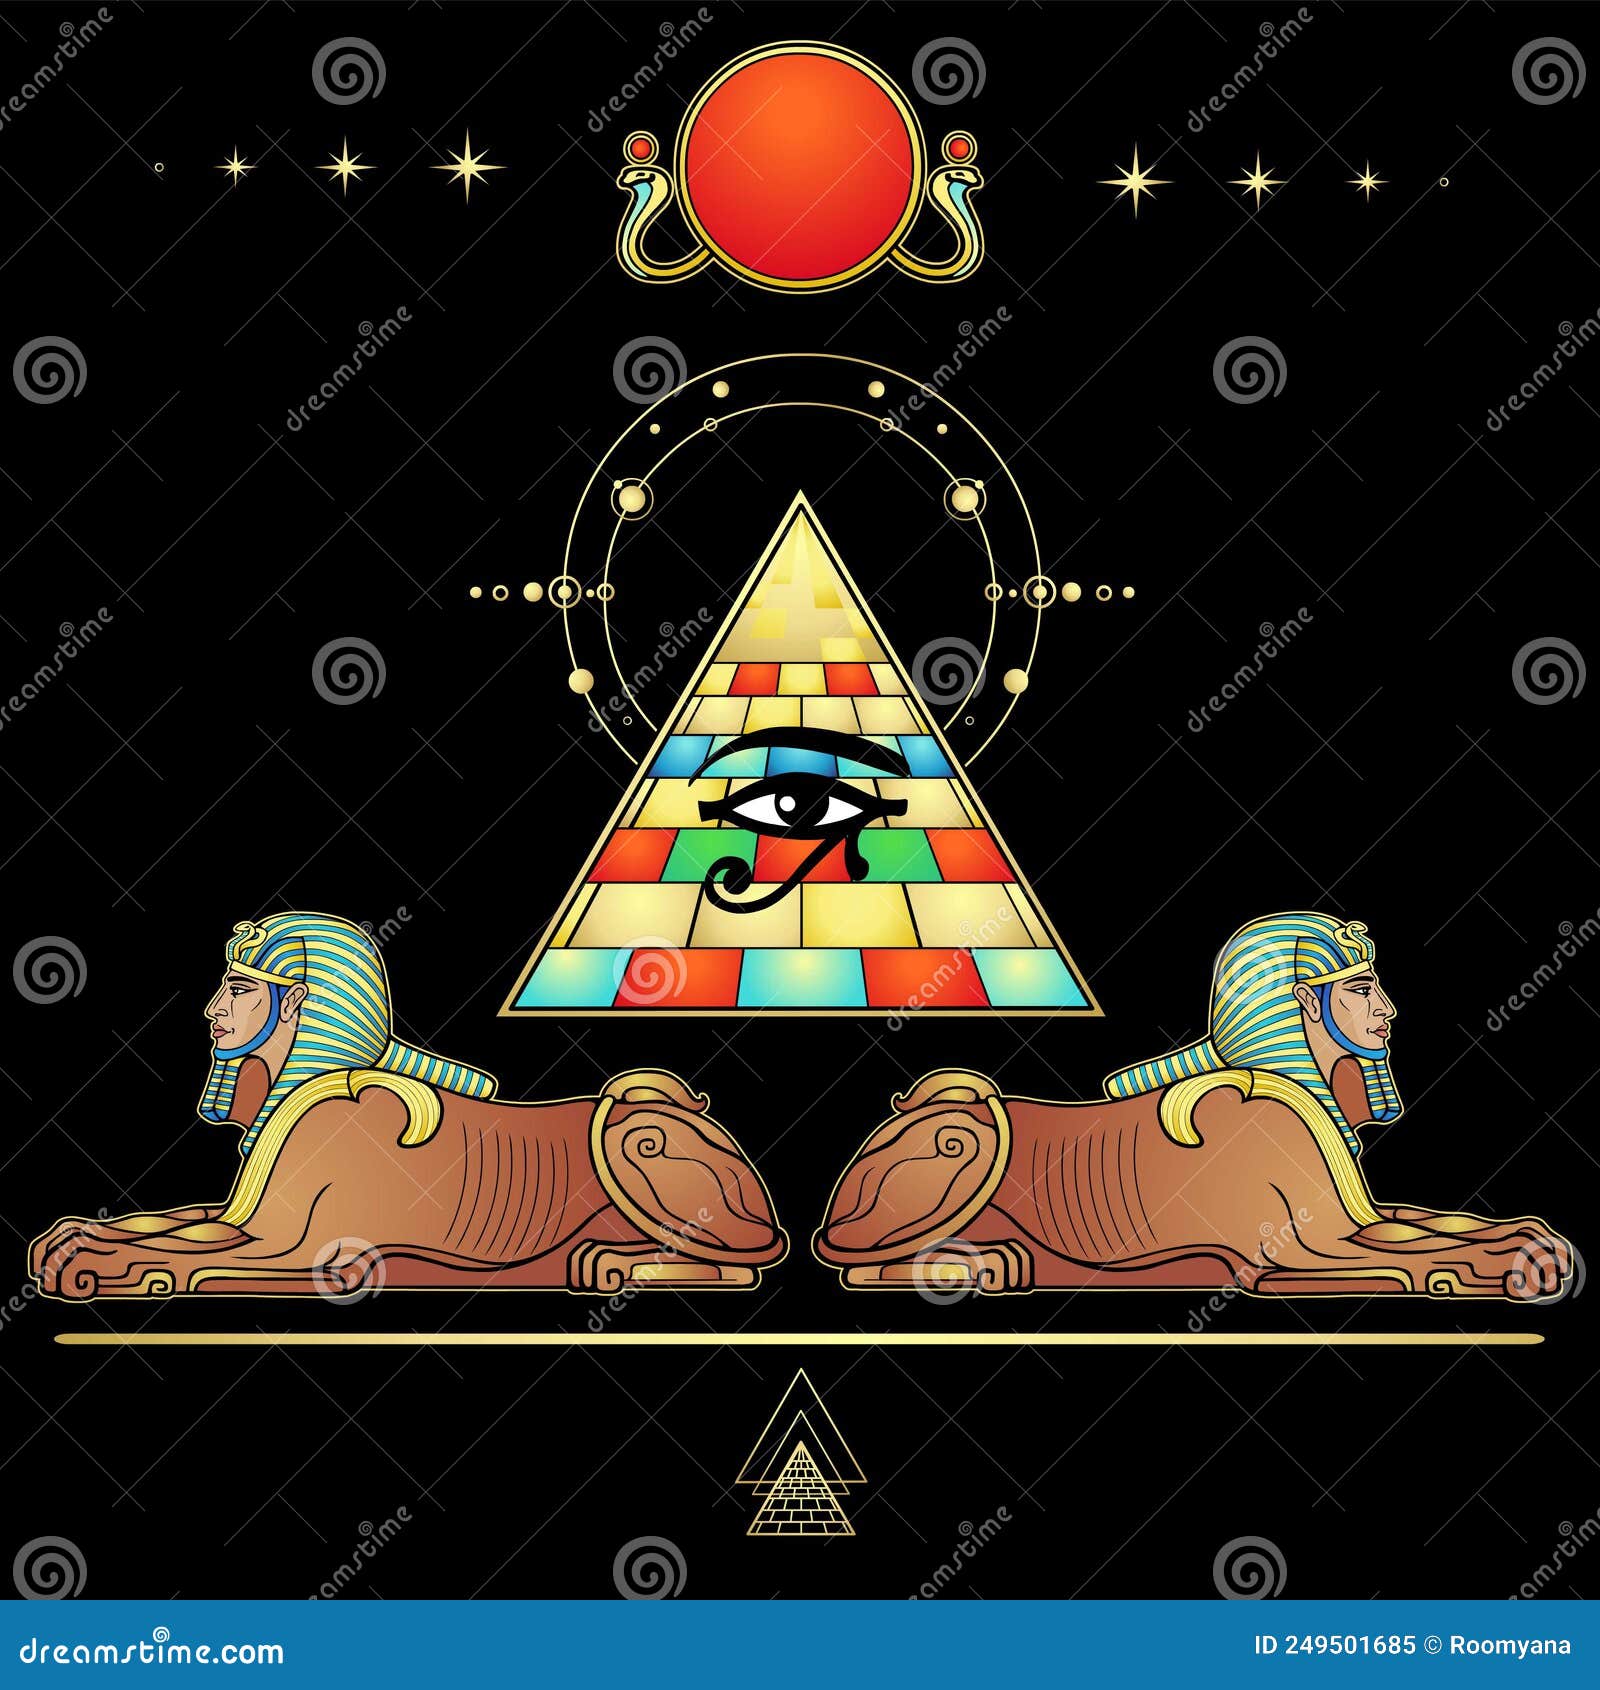 mystical color drawing: men sphinxes guard the egyptian pyramid. eye of horus.